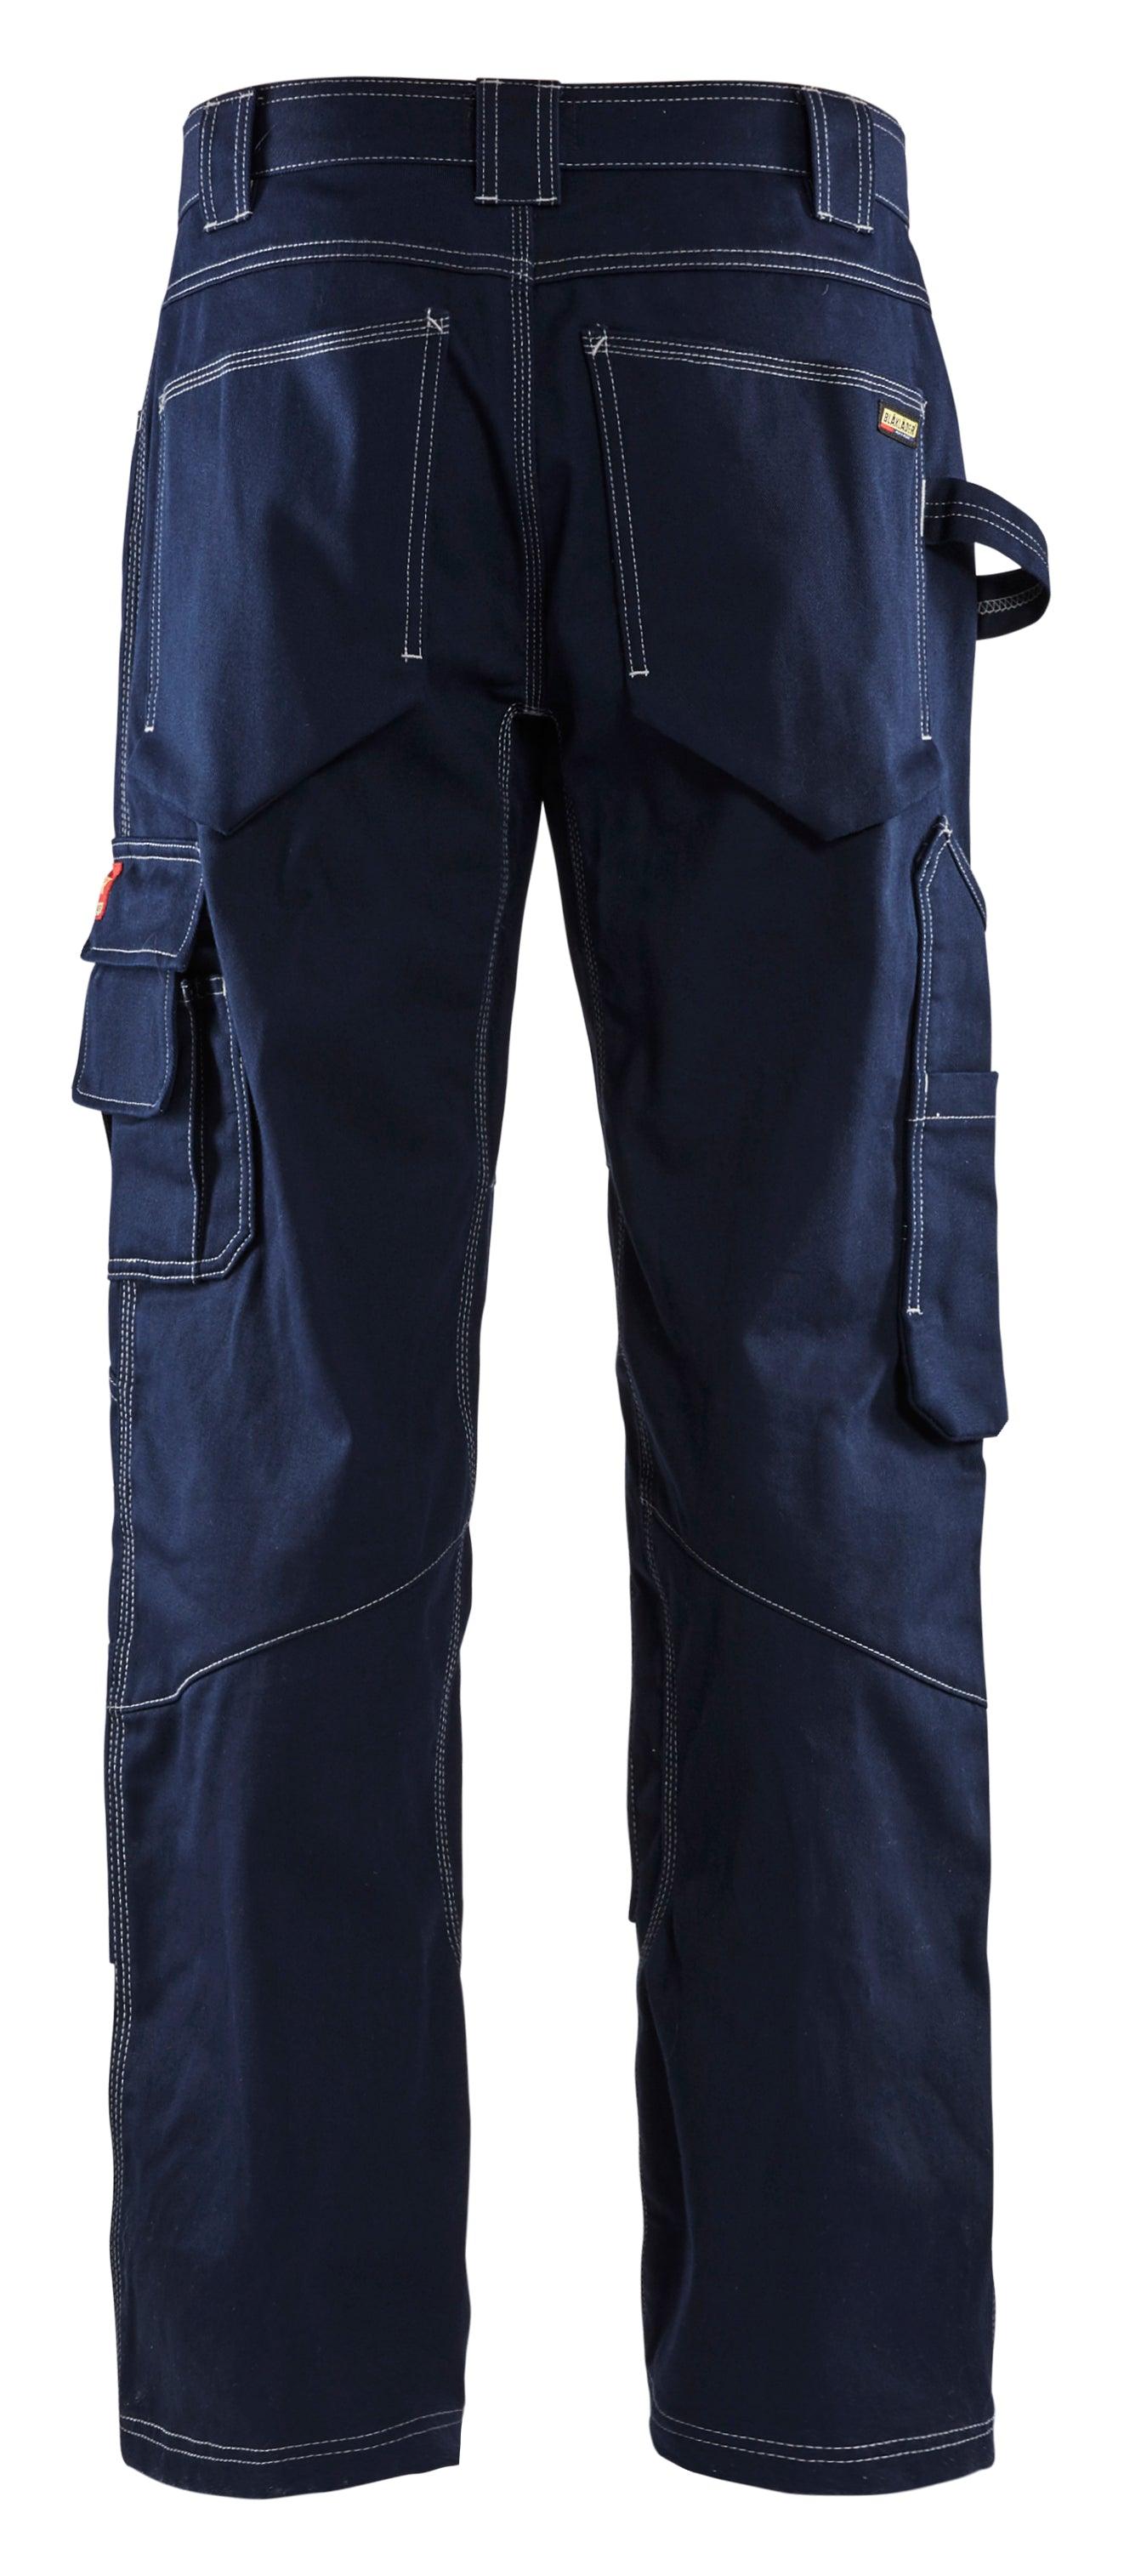 Blaklader 1676 10oz Flame Resistant Work Pants - Navy Blue - Trusted Gear Company LLC